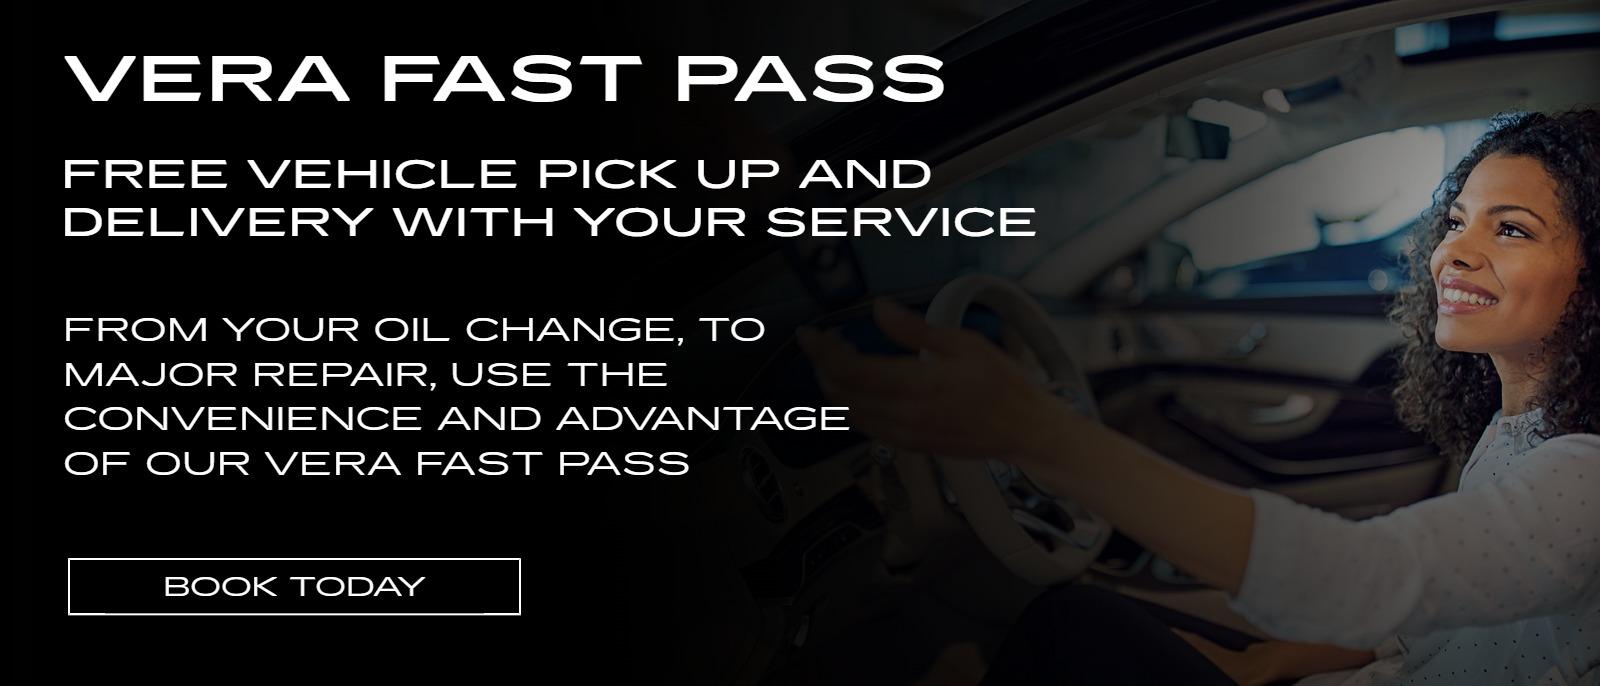 VERA FAST PASS
FREE VEHICLE PICK UP AND DELIVERY WITH YOUR SERVICE
FROM YOUR OIL CHANGE, TO MAJOR REPAIR, USE THE CONVENIENCE AND ADVANTAGE OF OUR VERA FAST PASS